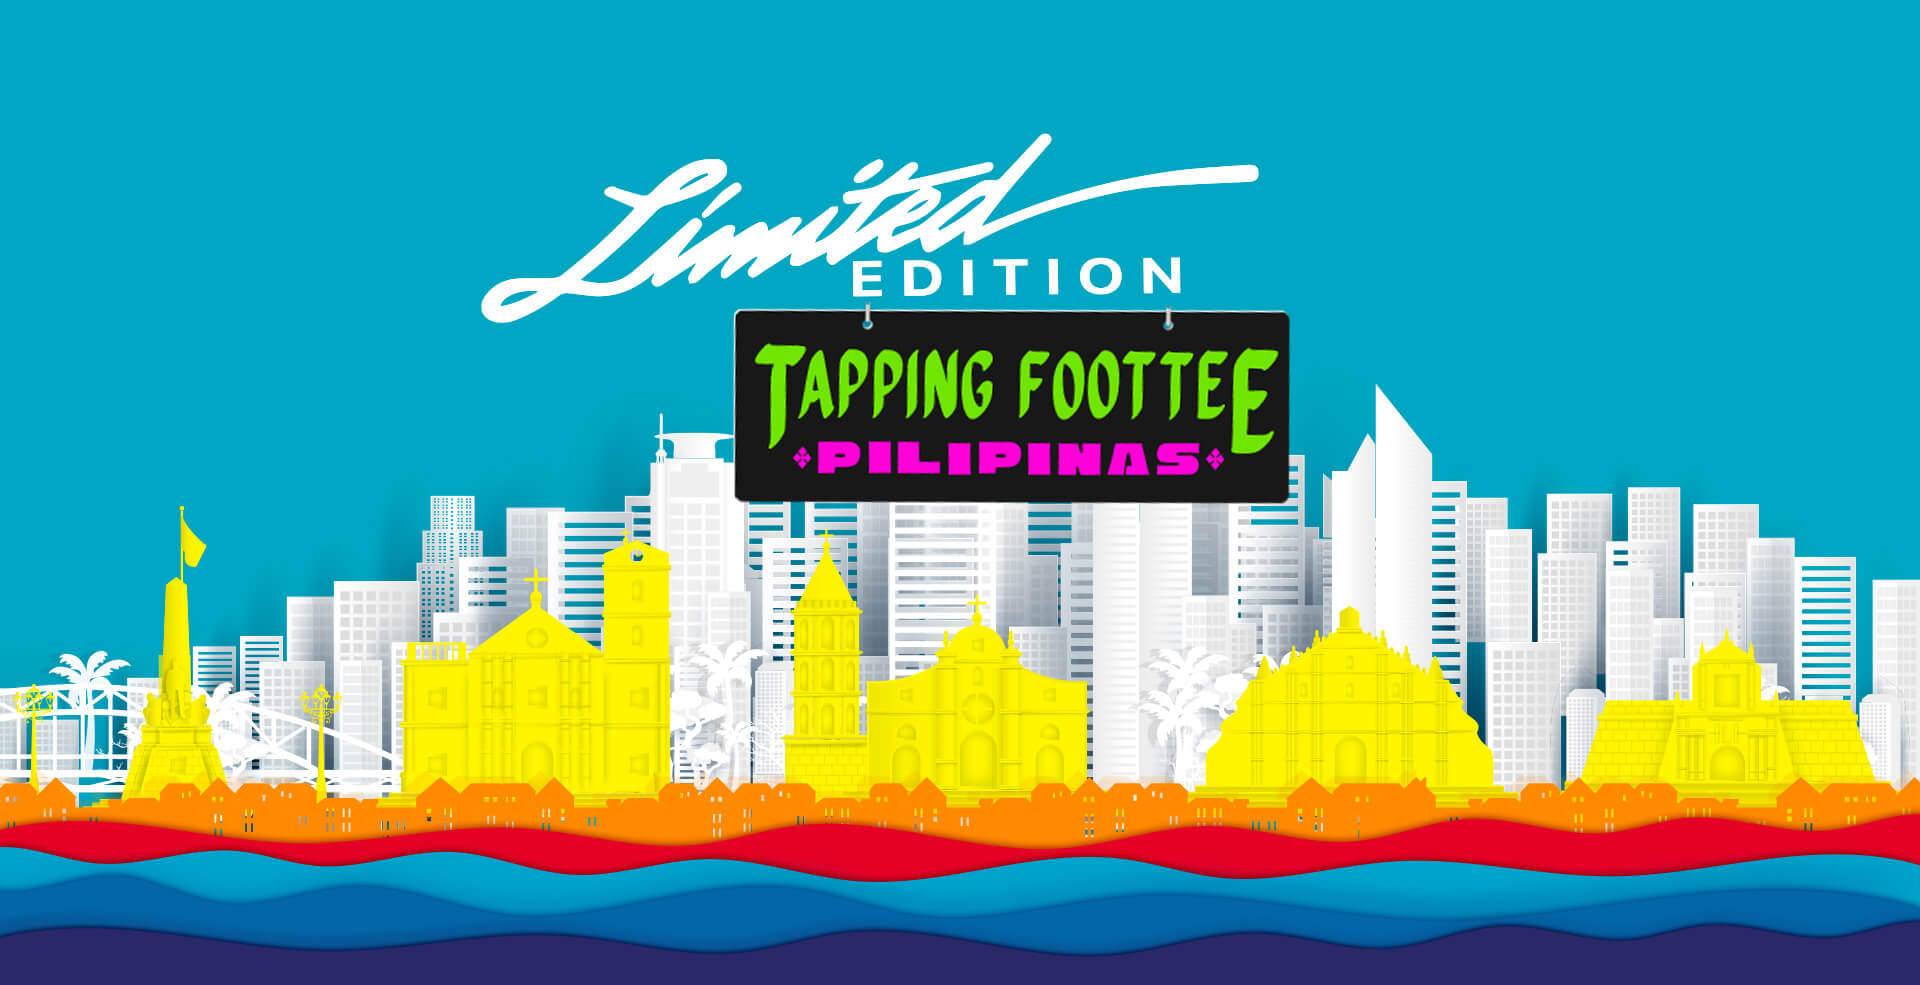 Tapping Foottee Pilipinas Poster